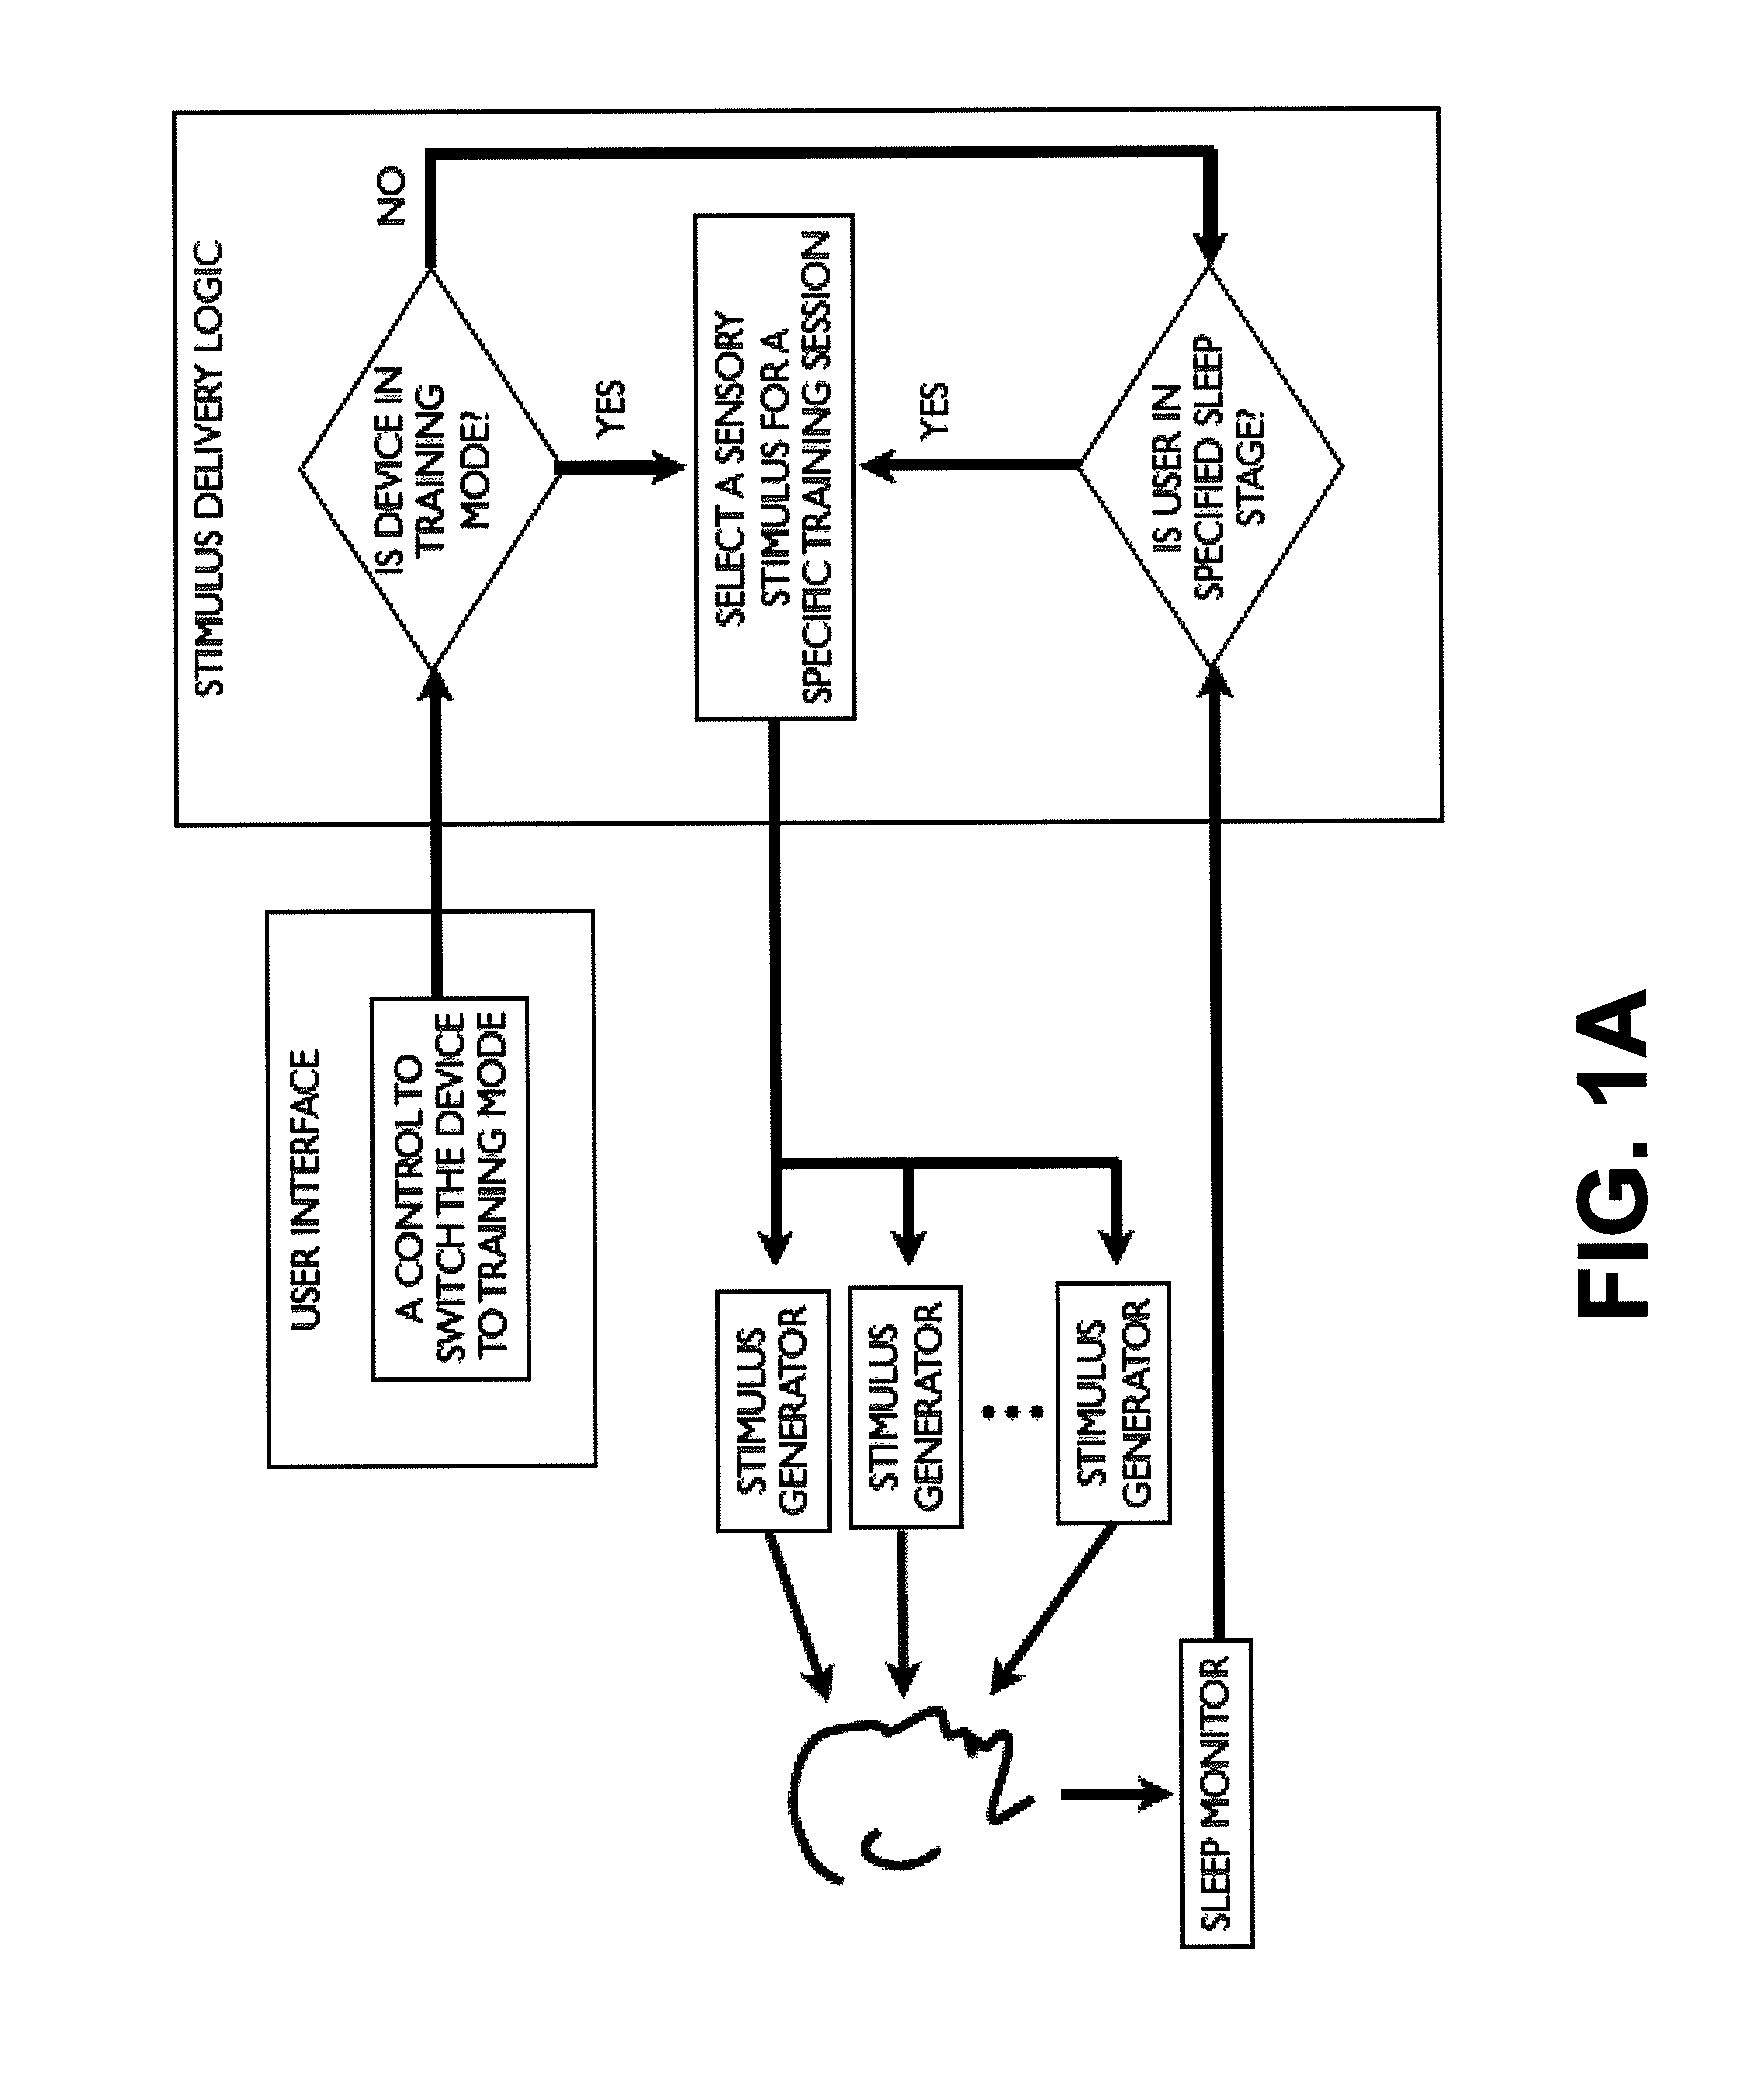 Apparatus, system, and method for modulating consolidation of memory during sleep